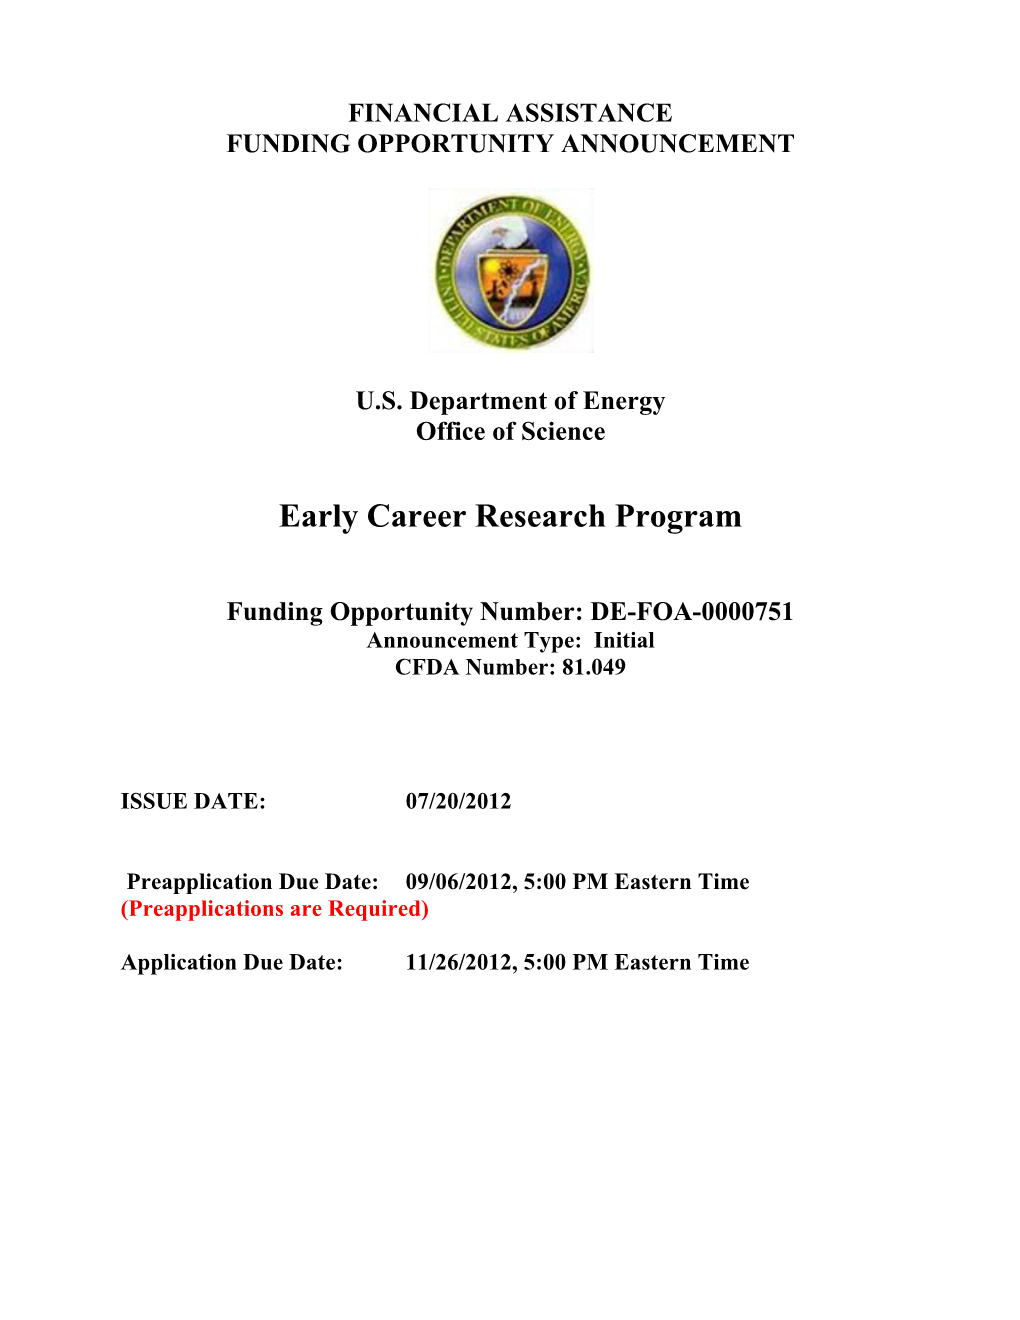 Early Career Research Program